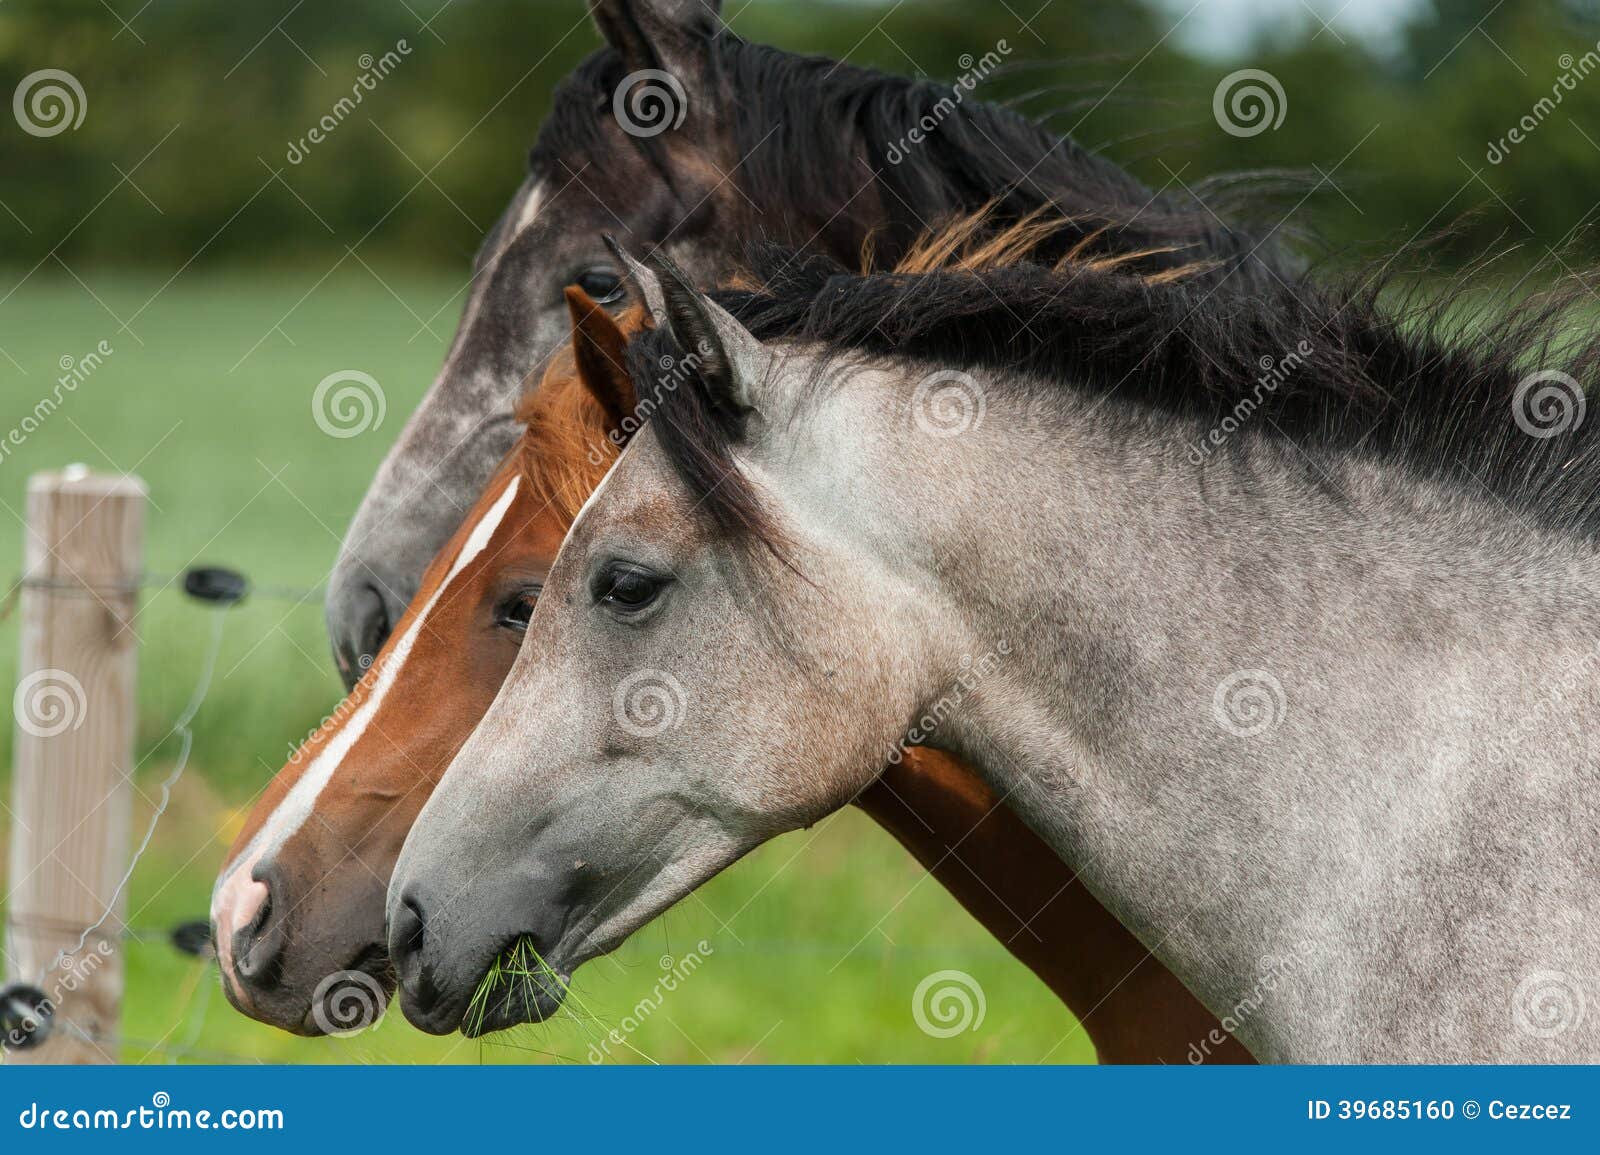 Three Horses Of A Different Color Stock Photo Image of